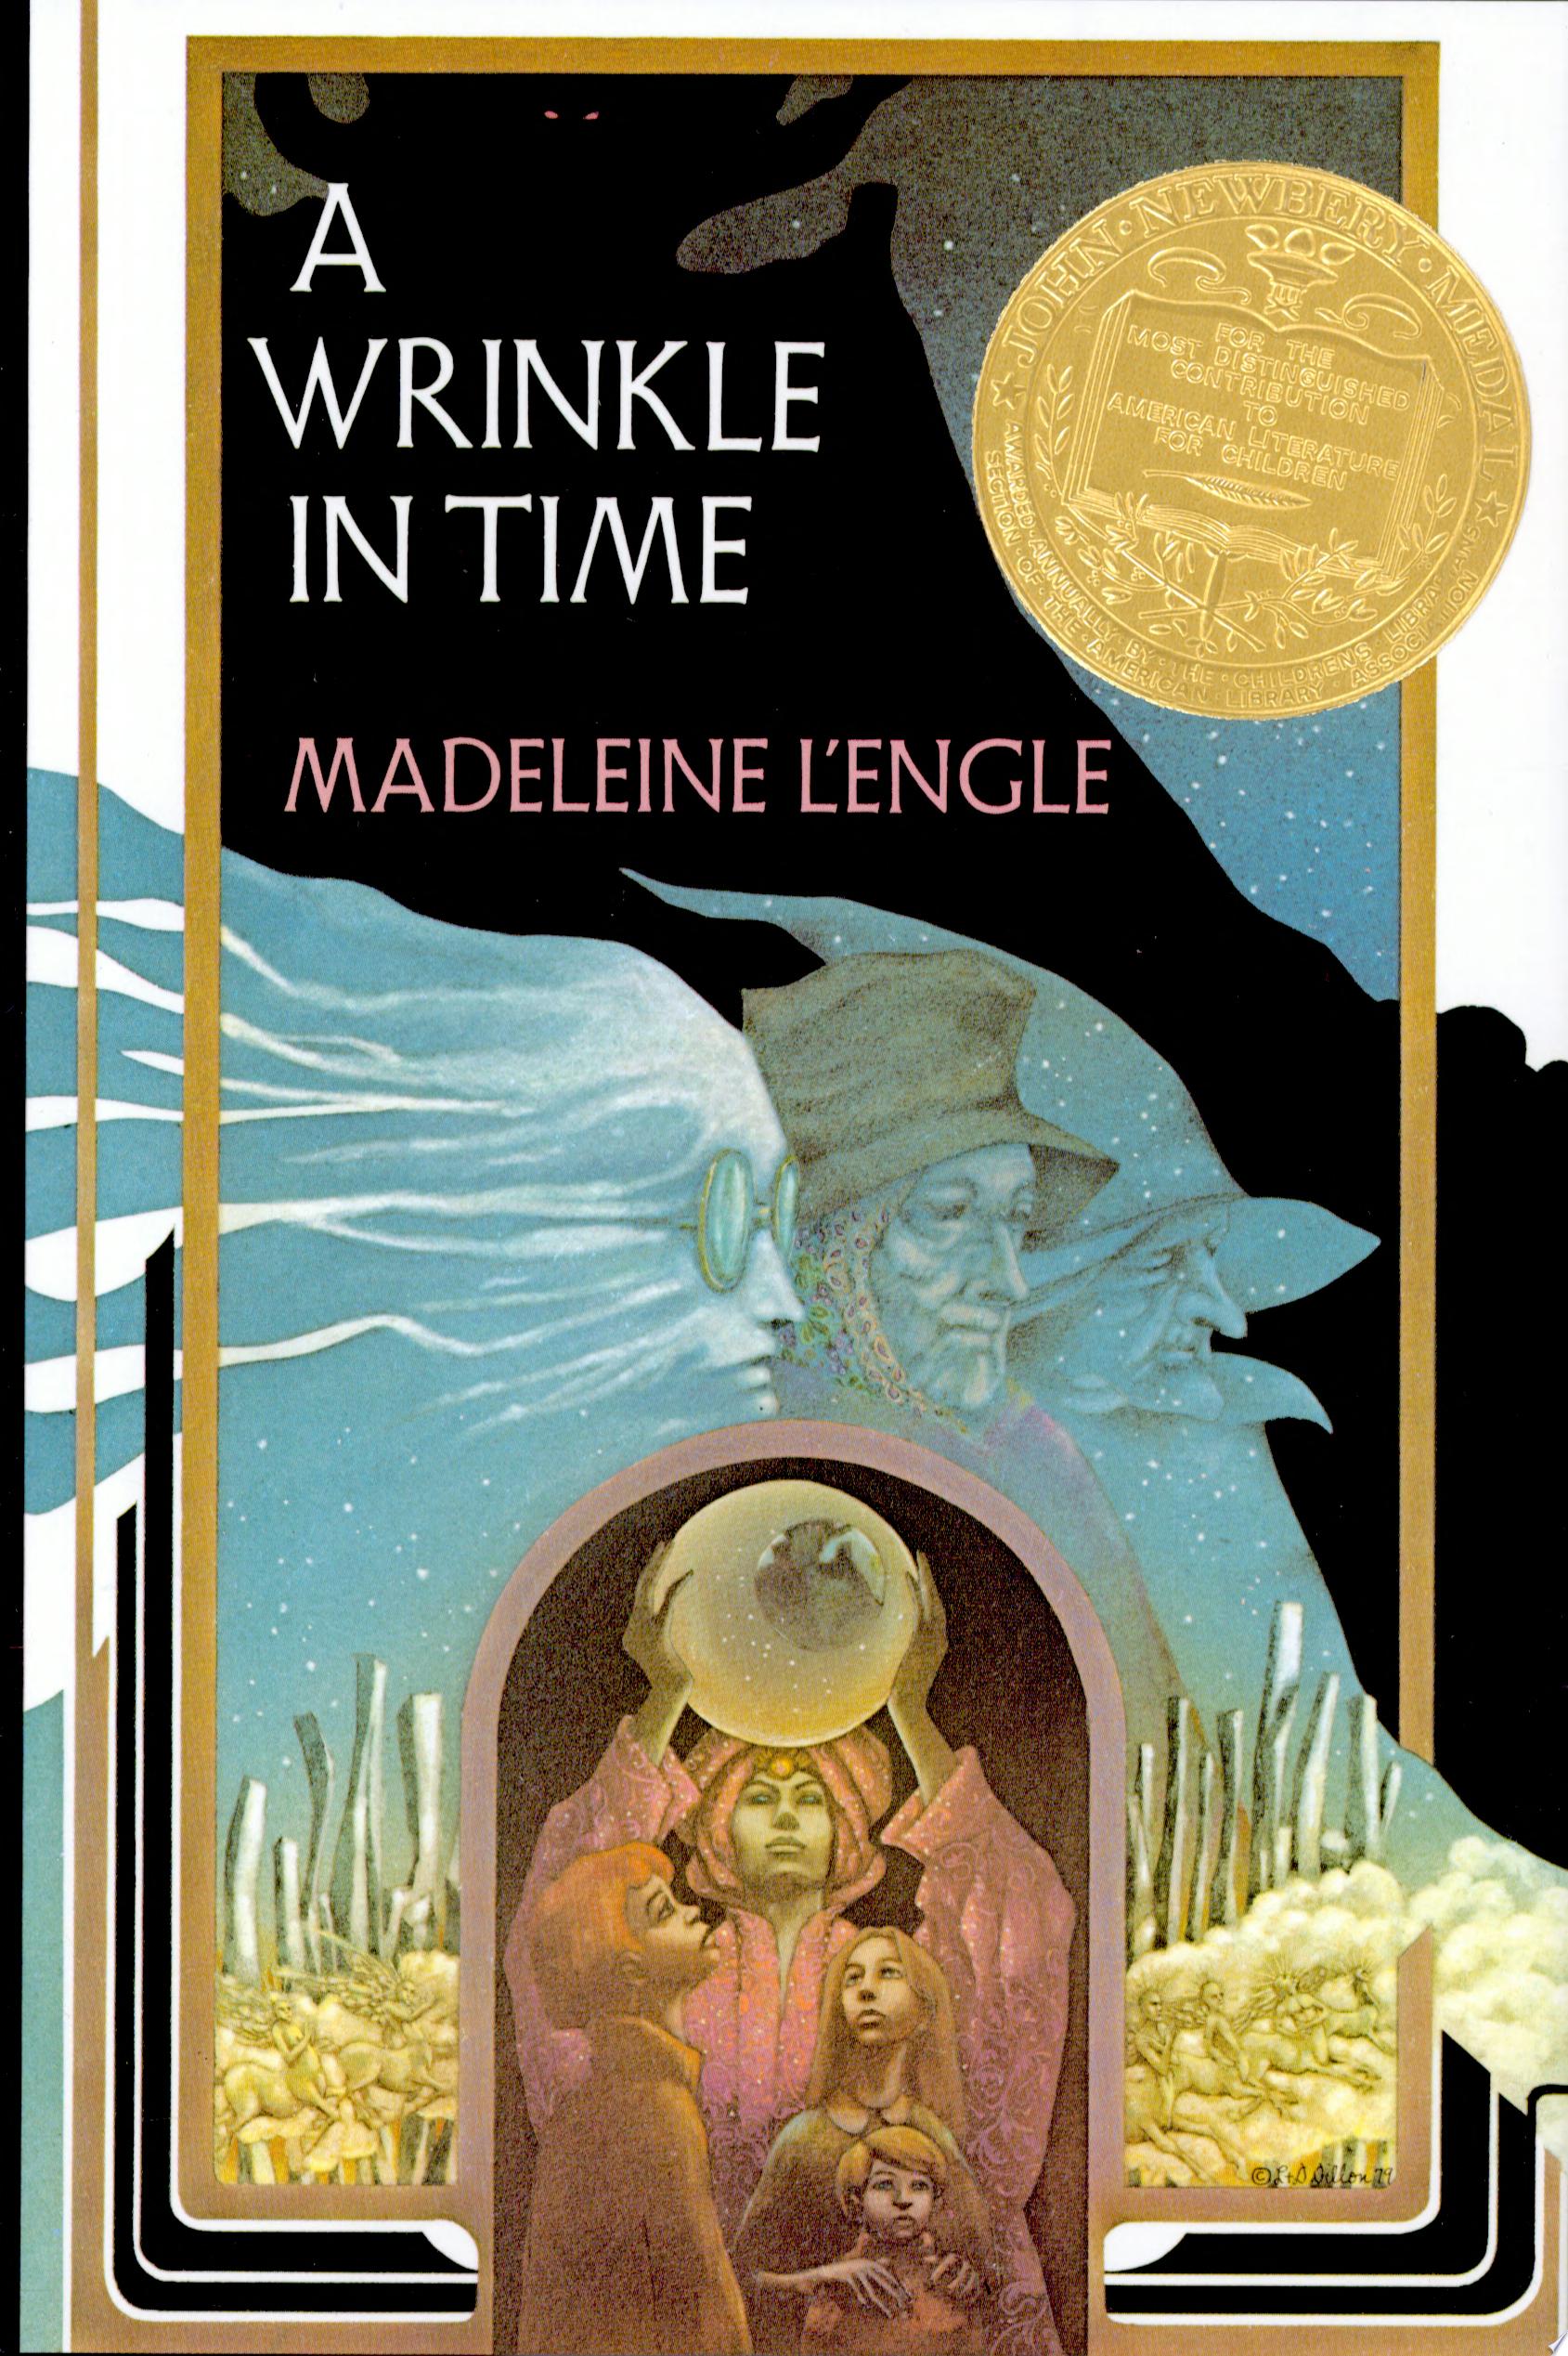 Image for "A Wrinkle in Time"